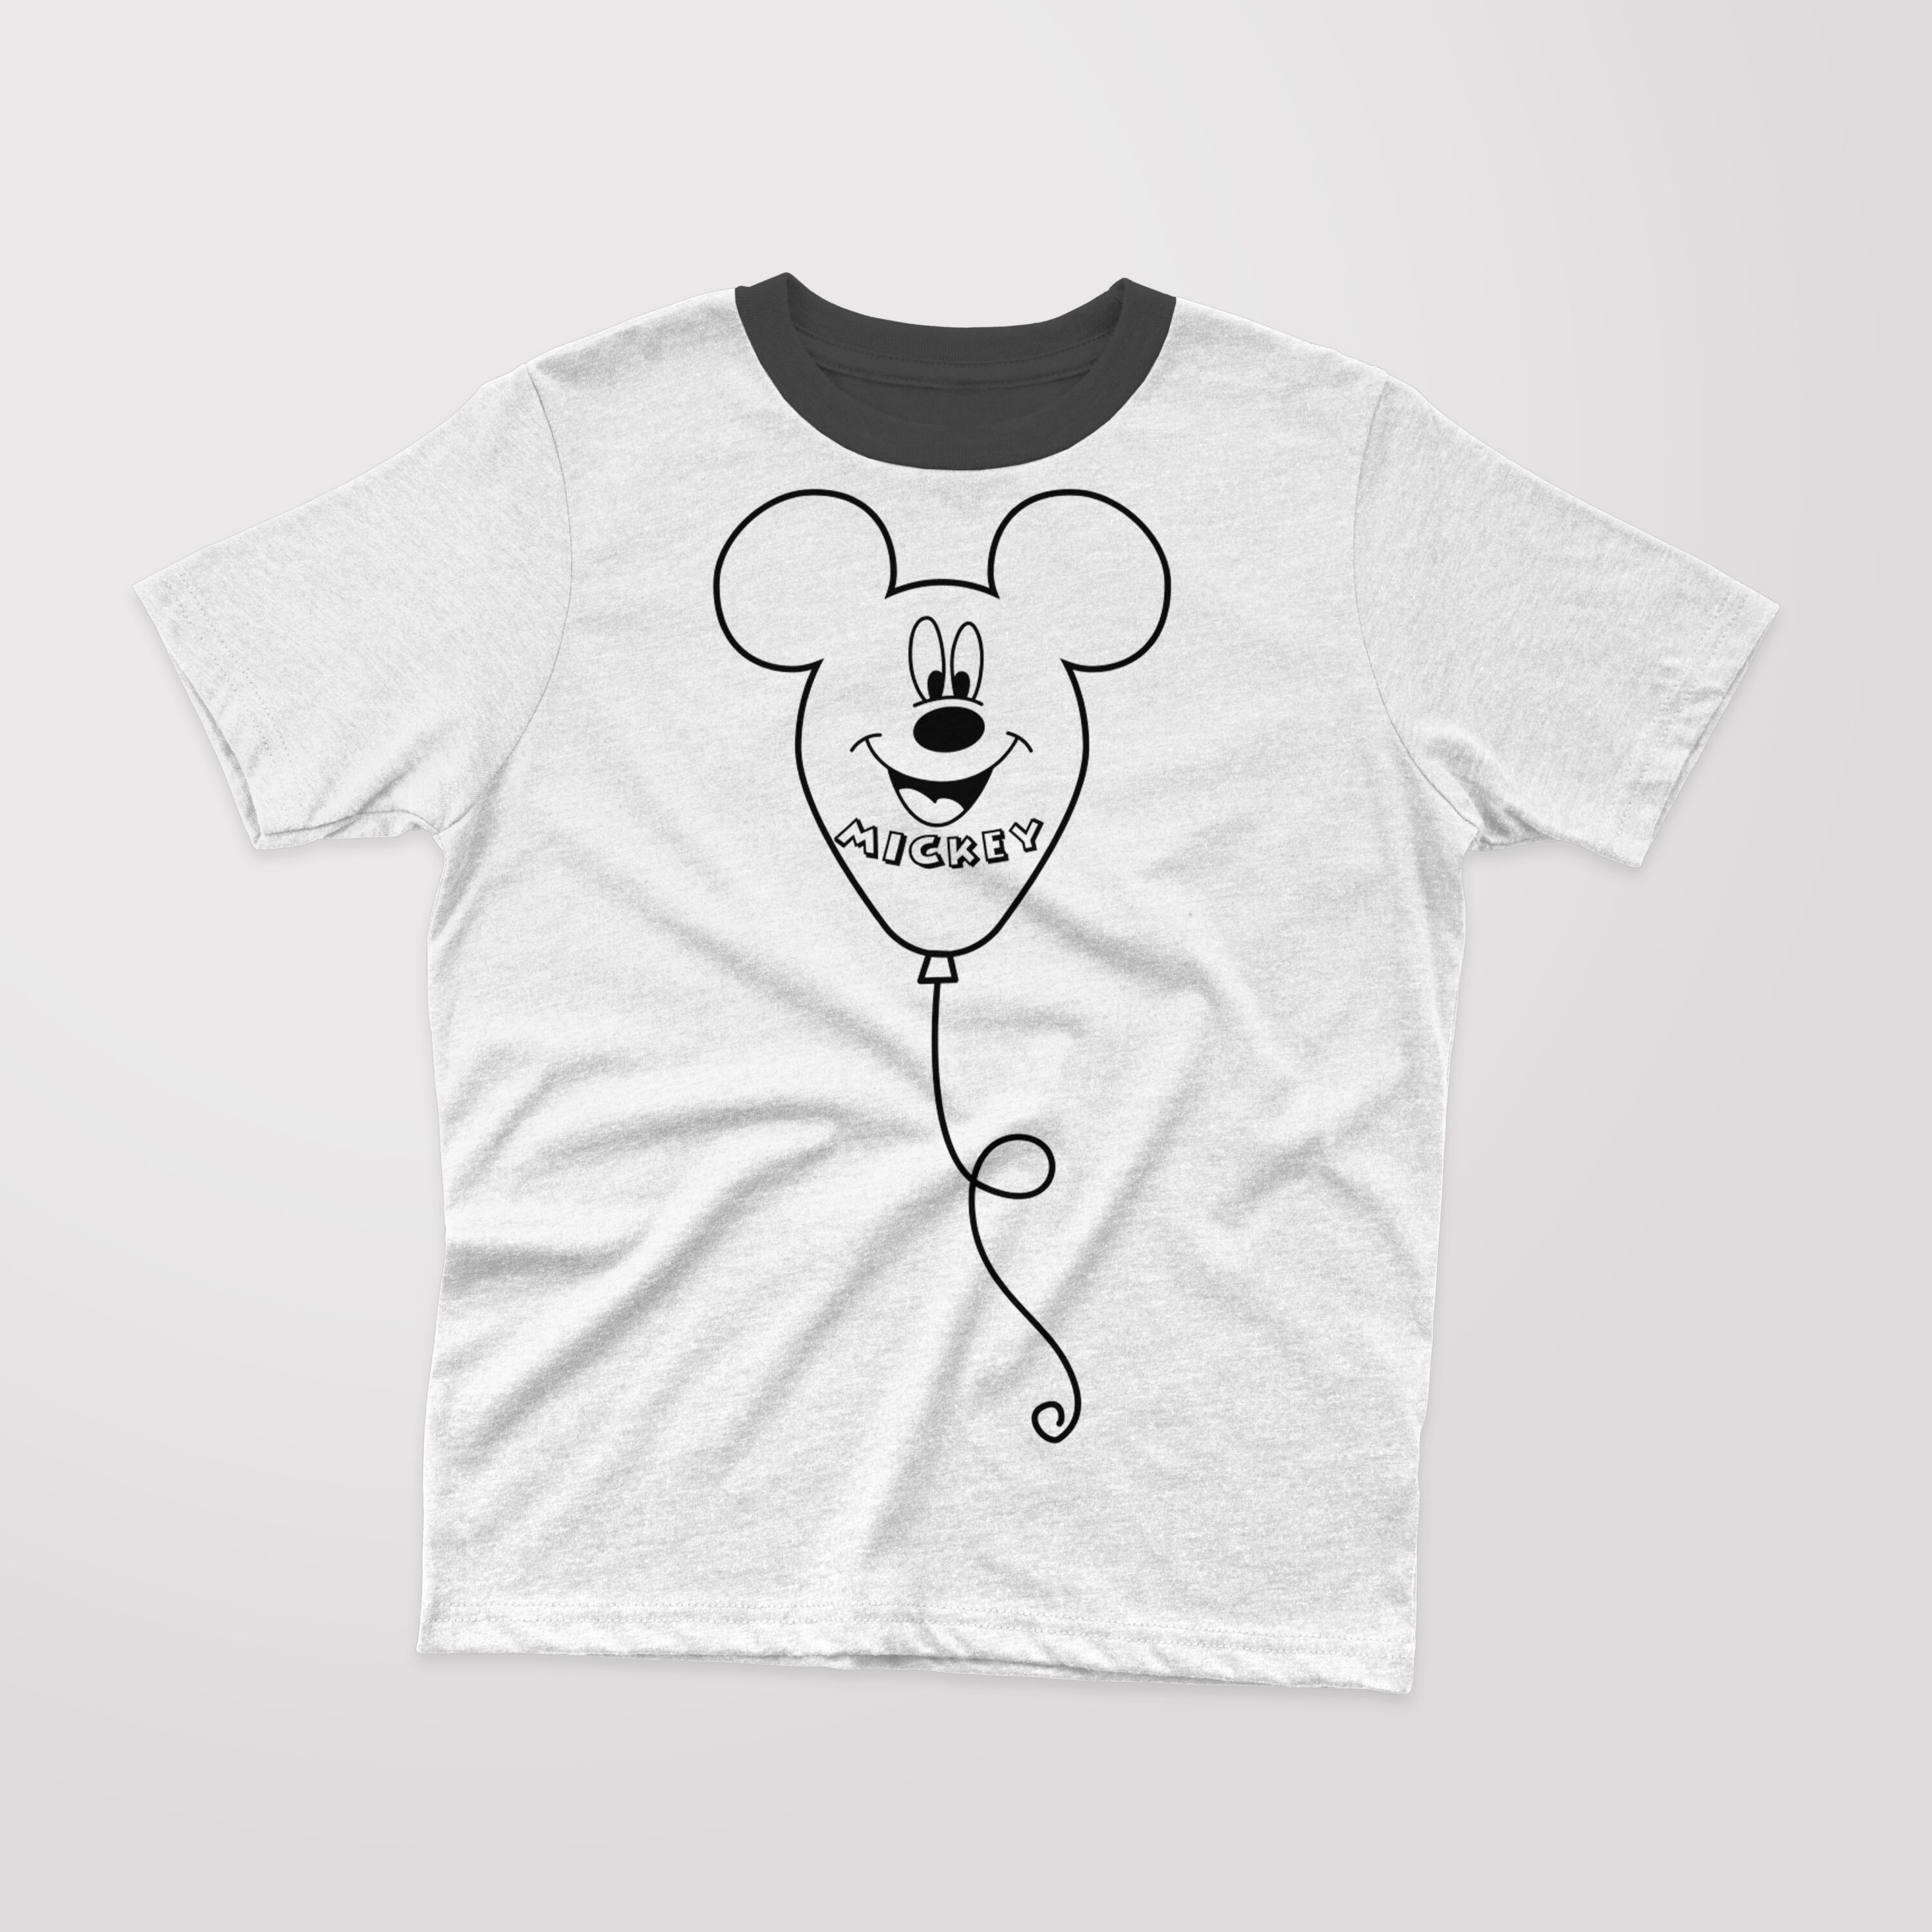 White t-shirt with the Mickey Mouse balloon.